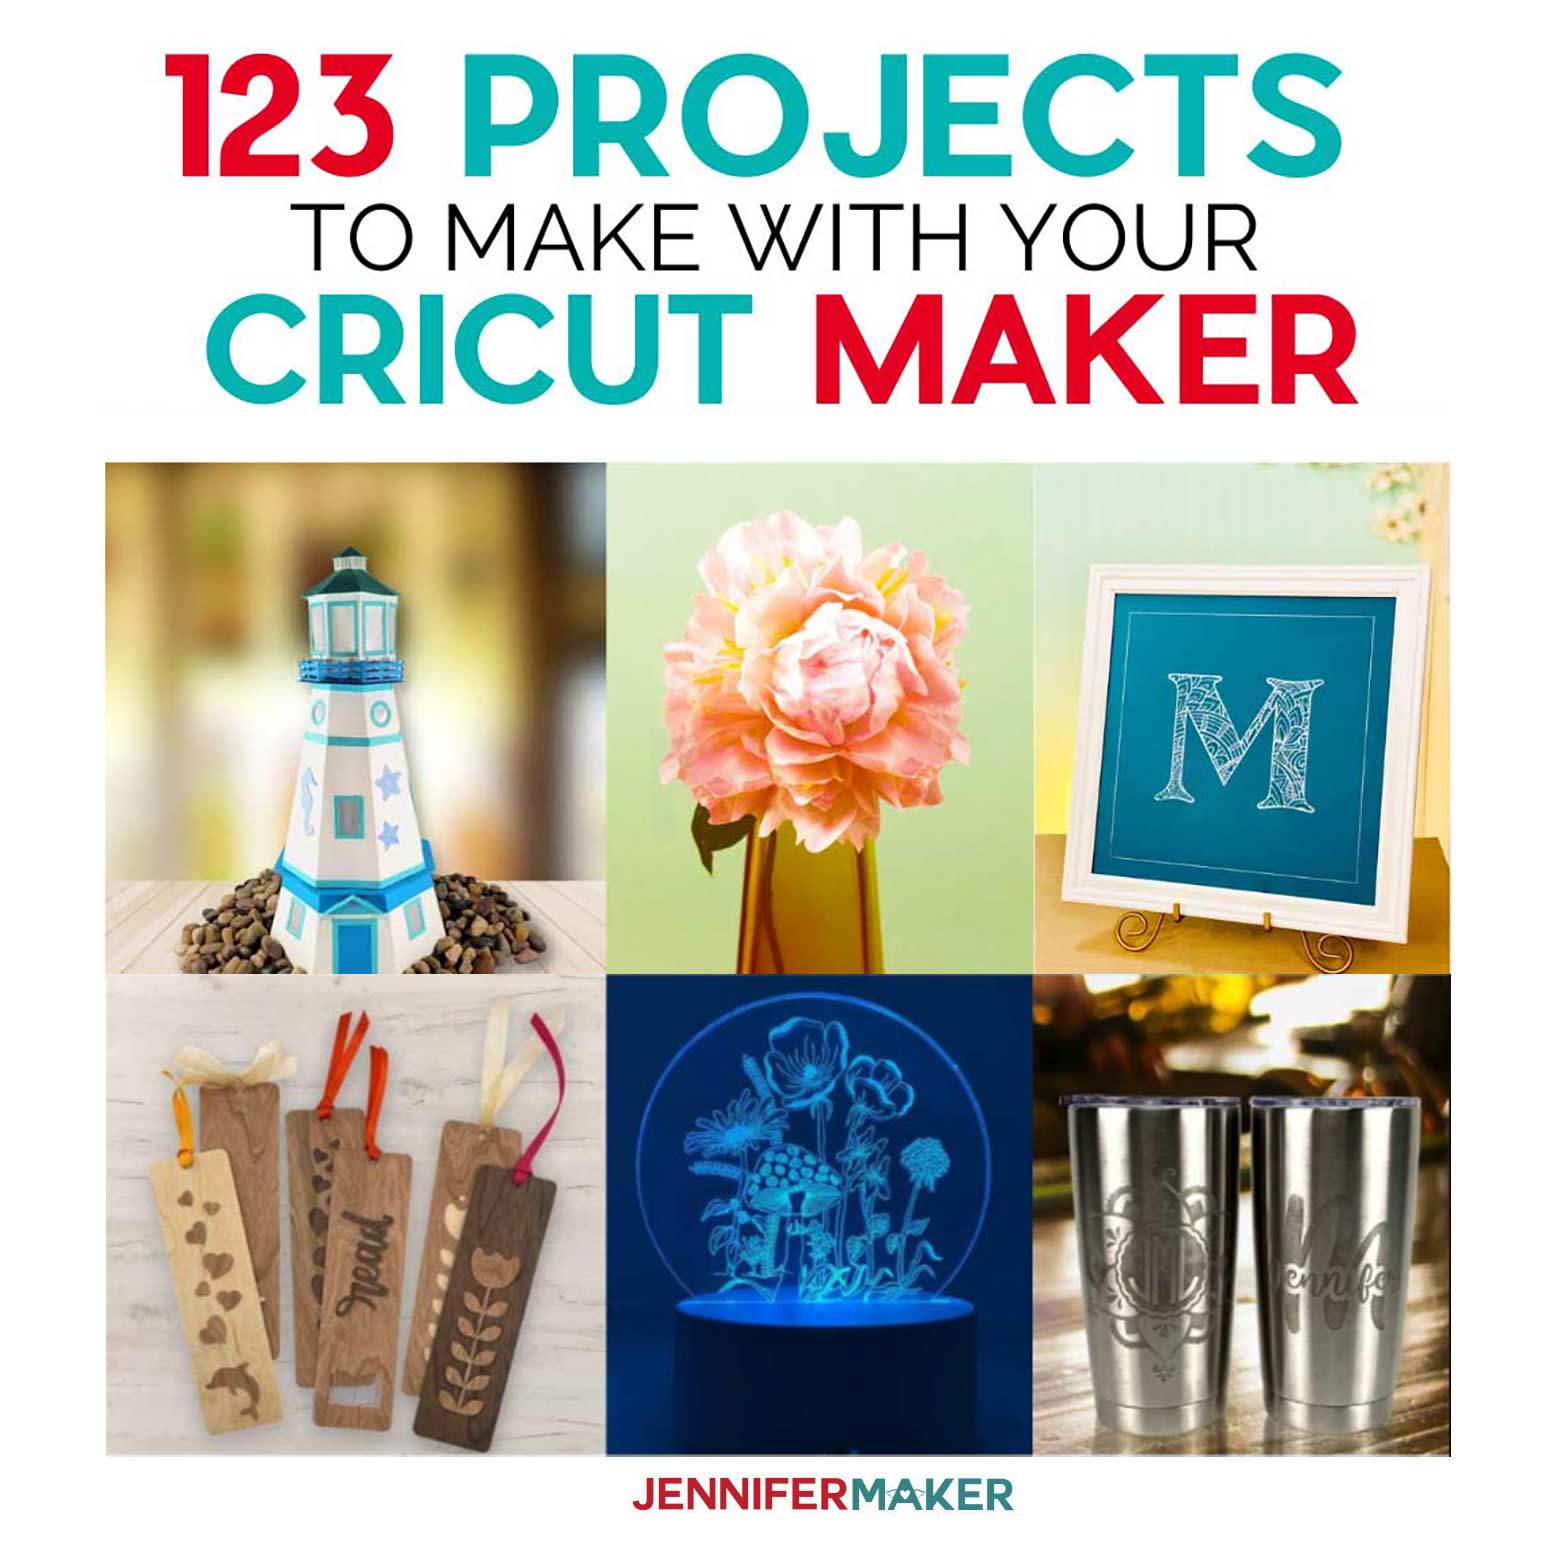 Variety of projects you can make with a Cricut Maker